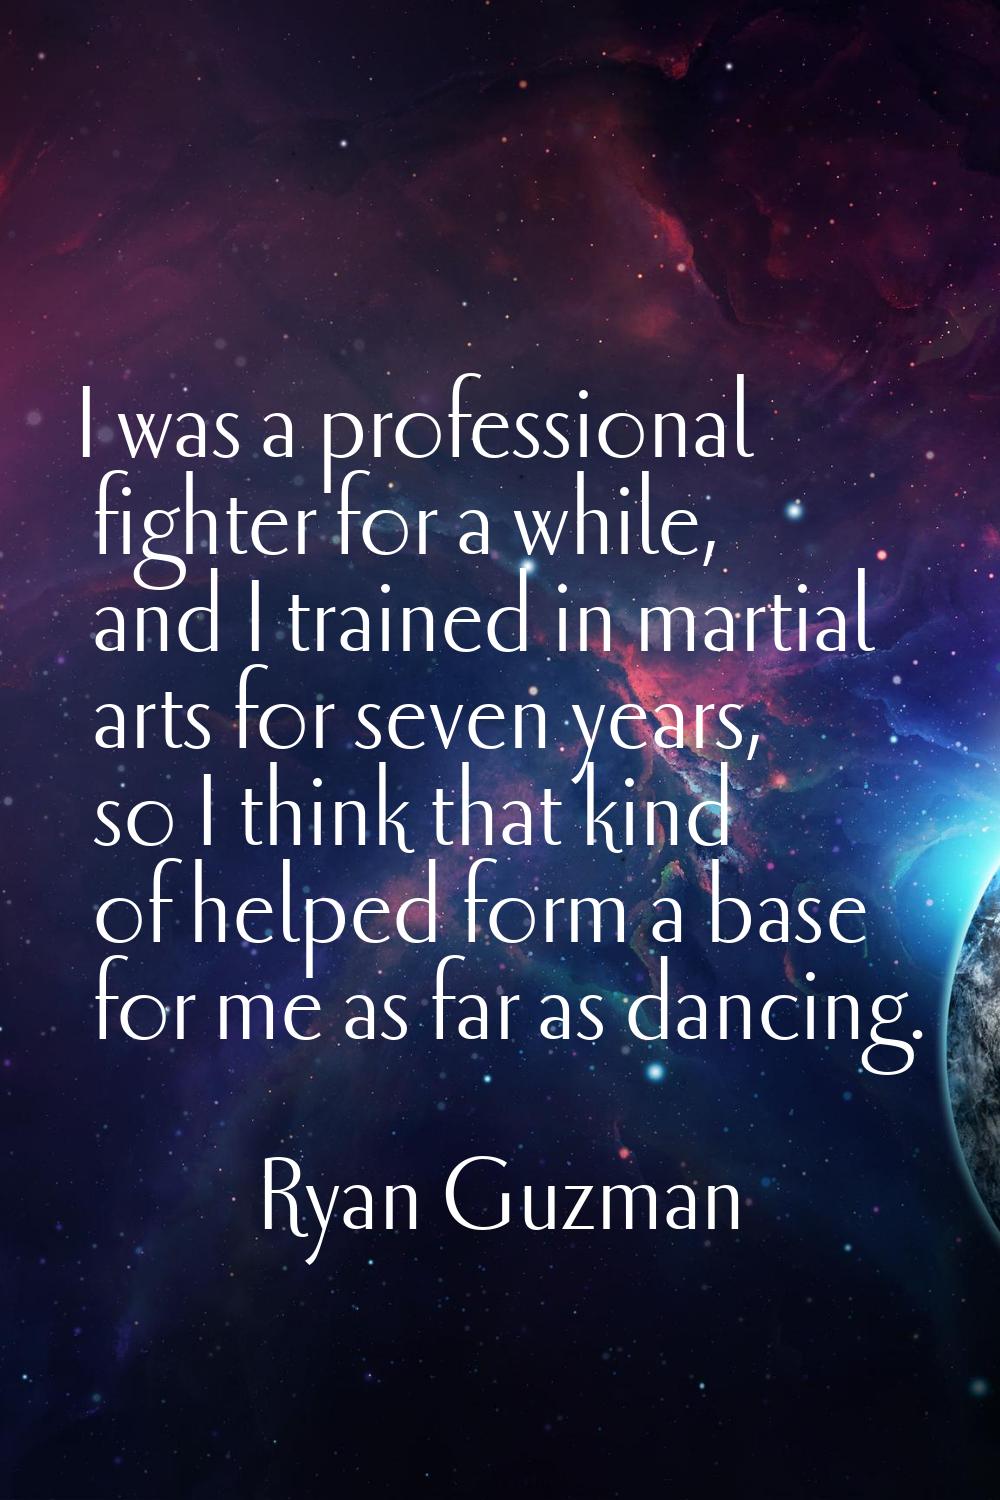 I was a professional fighter for a while, and I trained in martial arts for seven years, so I think